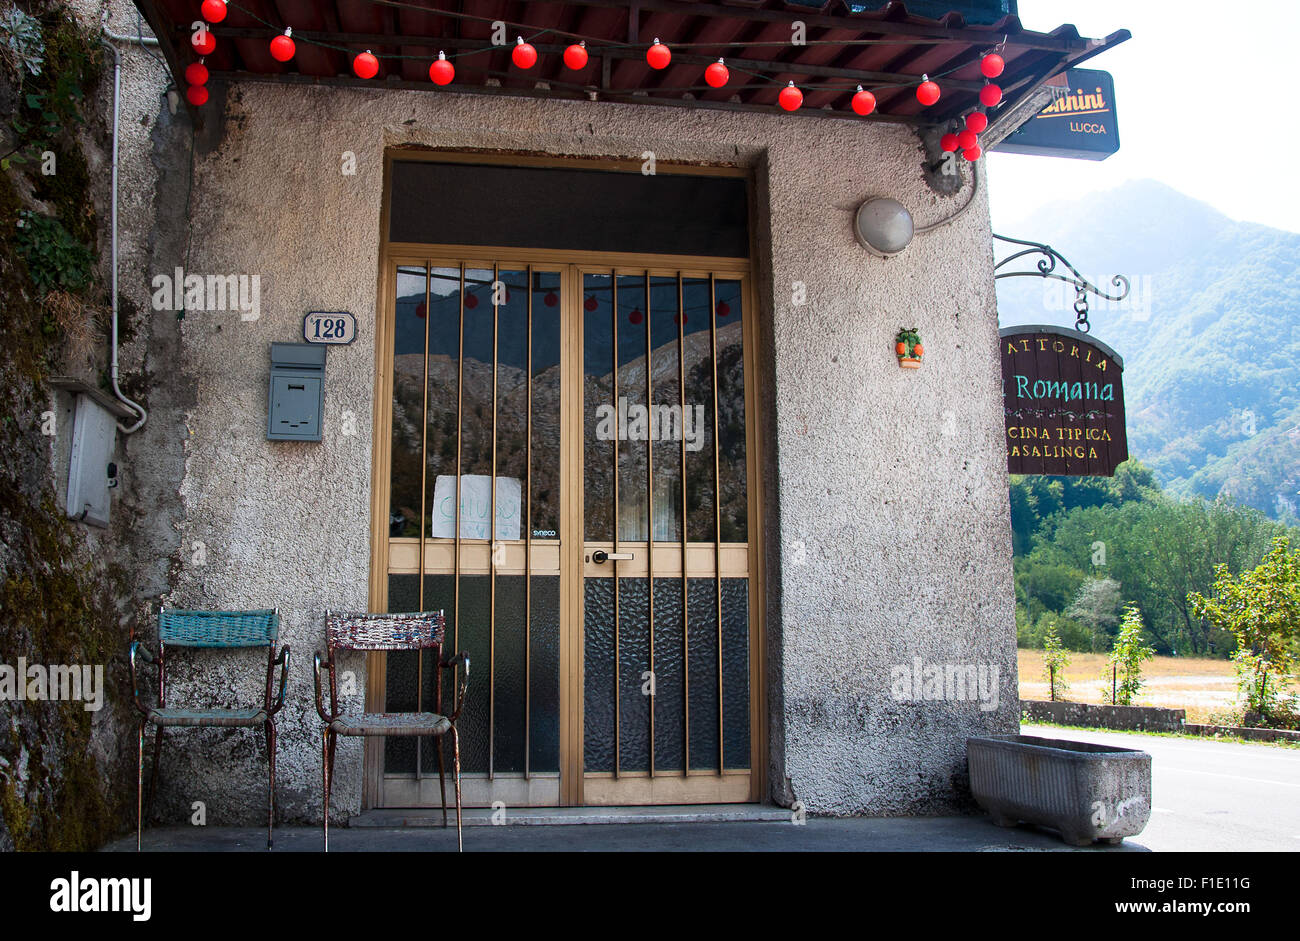 Restaurant entry with 2 chairs at  front door, Alpuan Alps, Tre Fiumi, Tuscany, Italy Stock Photo